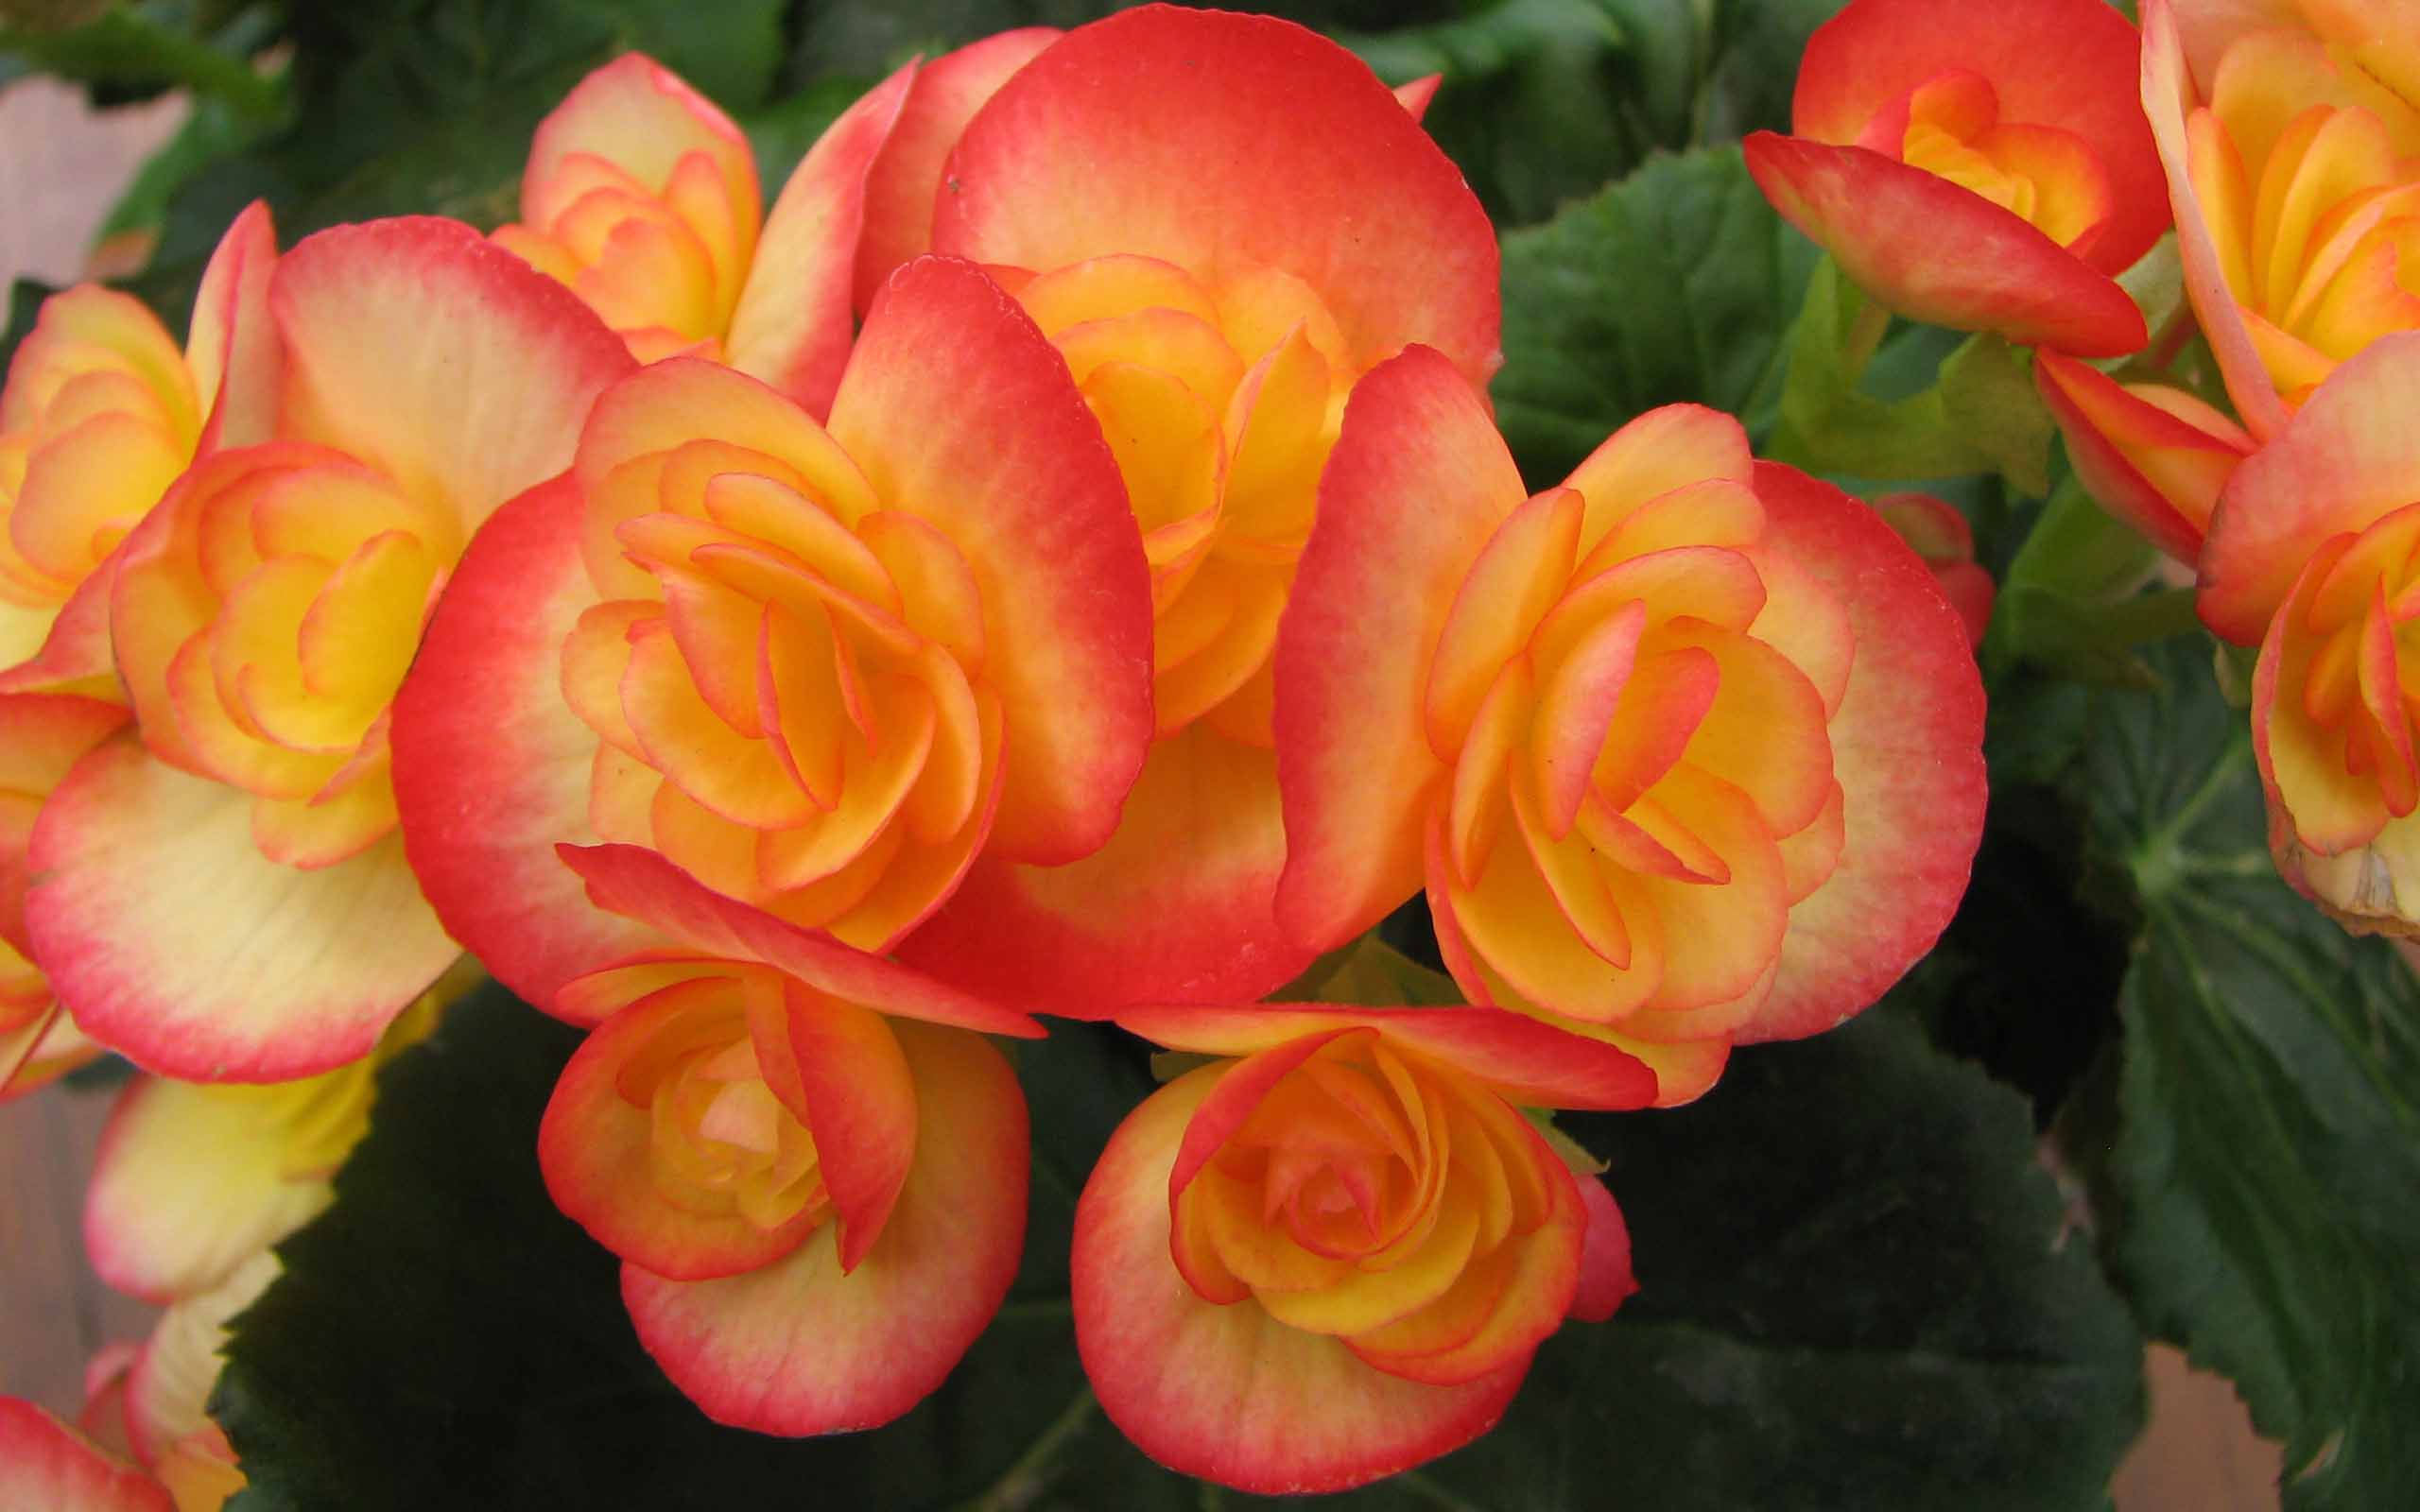 Midnight Beauty Orange Begonia Flower Images Free Download